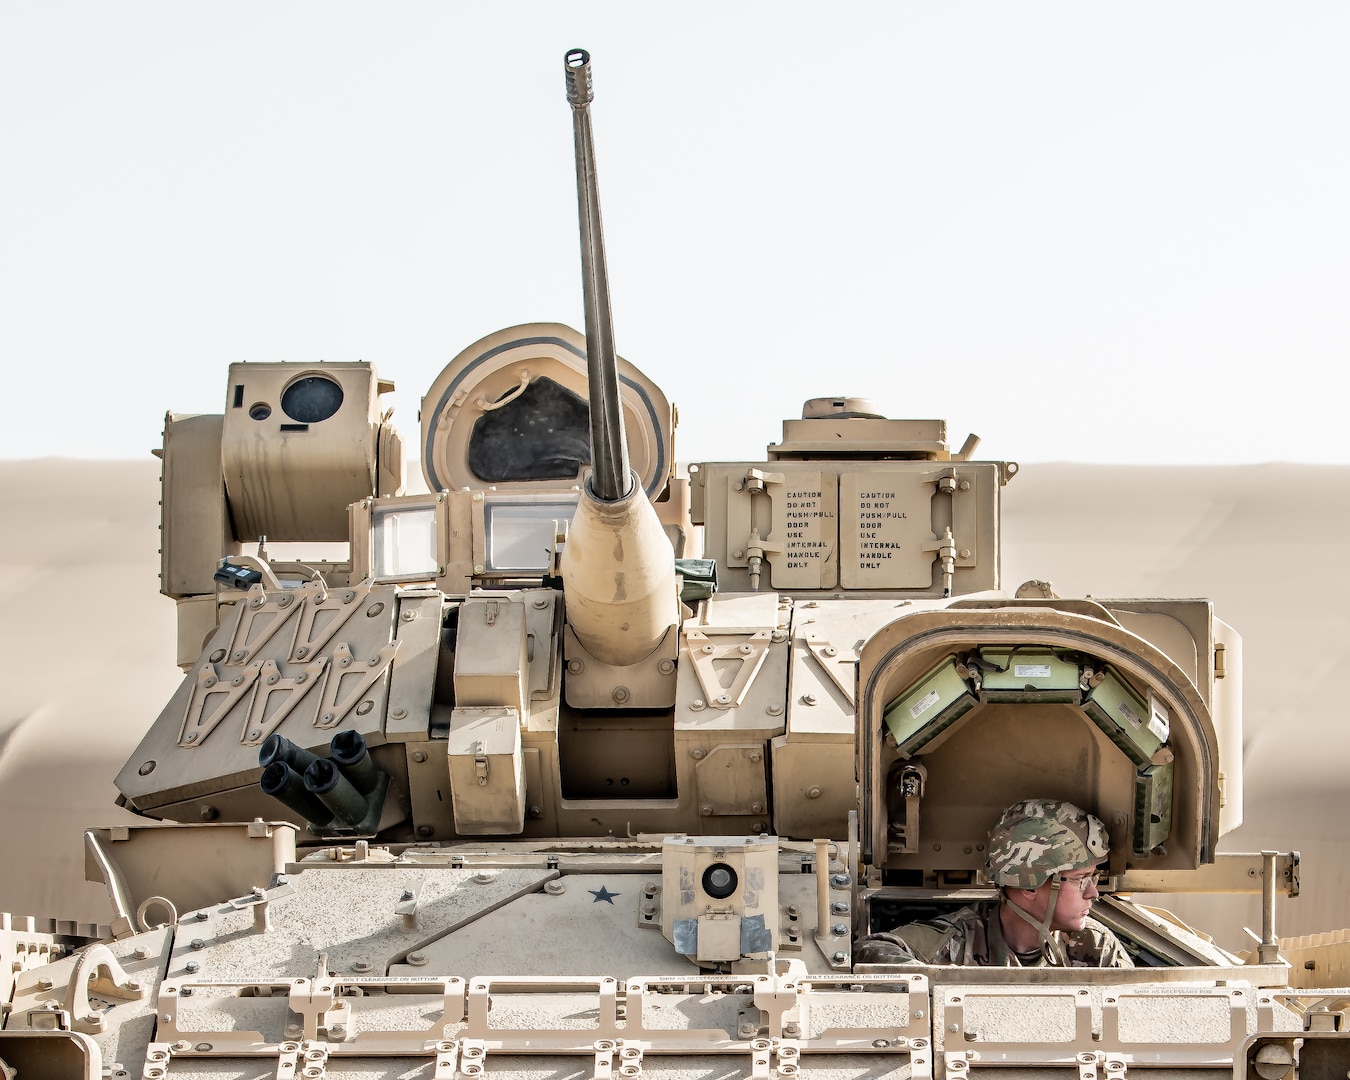 A U.S. Soldier from the 2nd Platoon, Alpha Company, 1/163rd Combined Arms Battalion, drives a Bradley M2A3 Fighting Vehicle to its inspection point at Ali Al Salem AB, Jan. 27, 2022. The vehicle is a light armored, fully tracked transport vehicle, providing cross-country mobility with mounted firepower and protection from artillery and small-arms fire. (U.S. Air National Guard photo by Staff Sgt. Chloe Ochs)